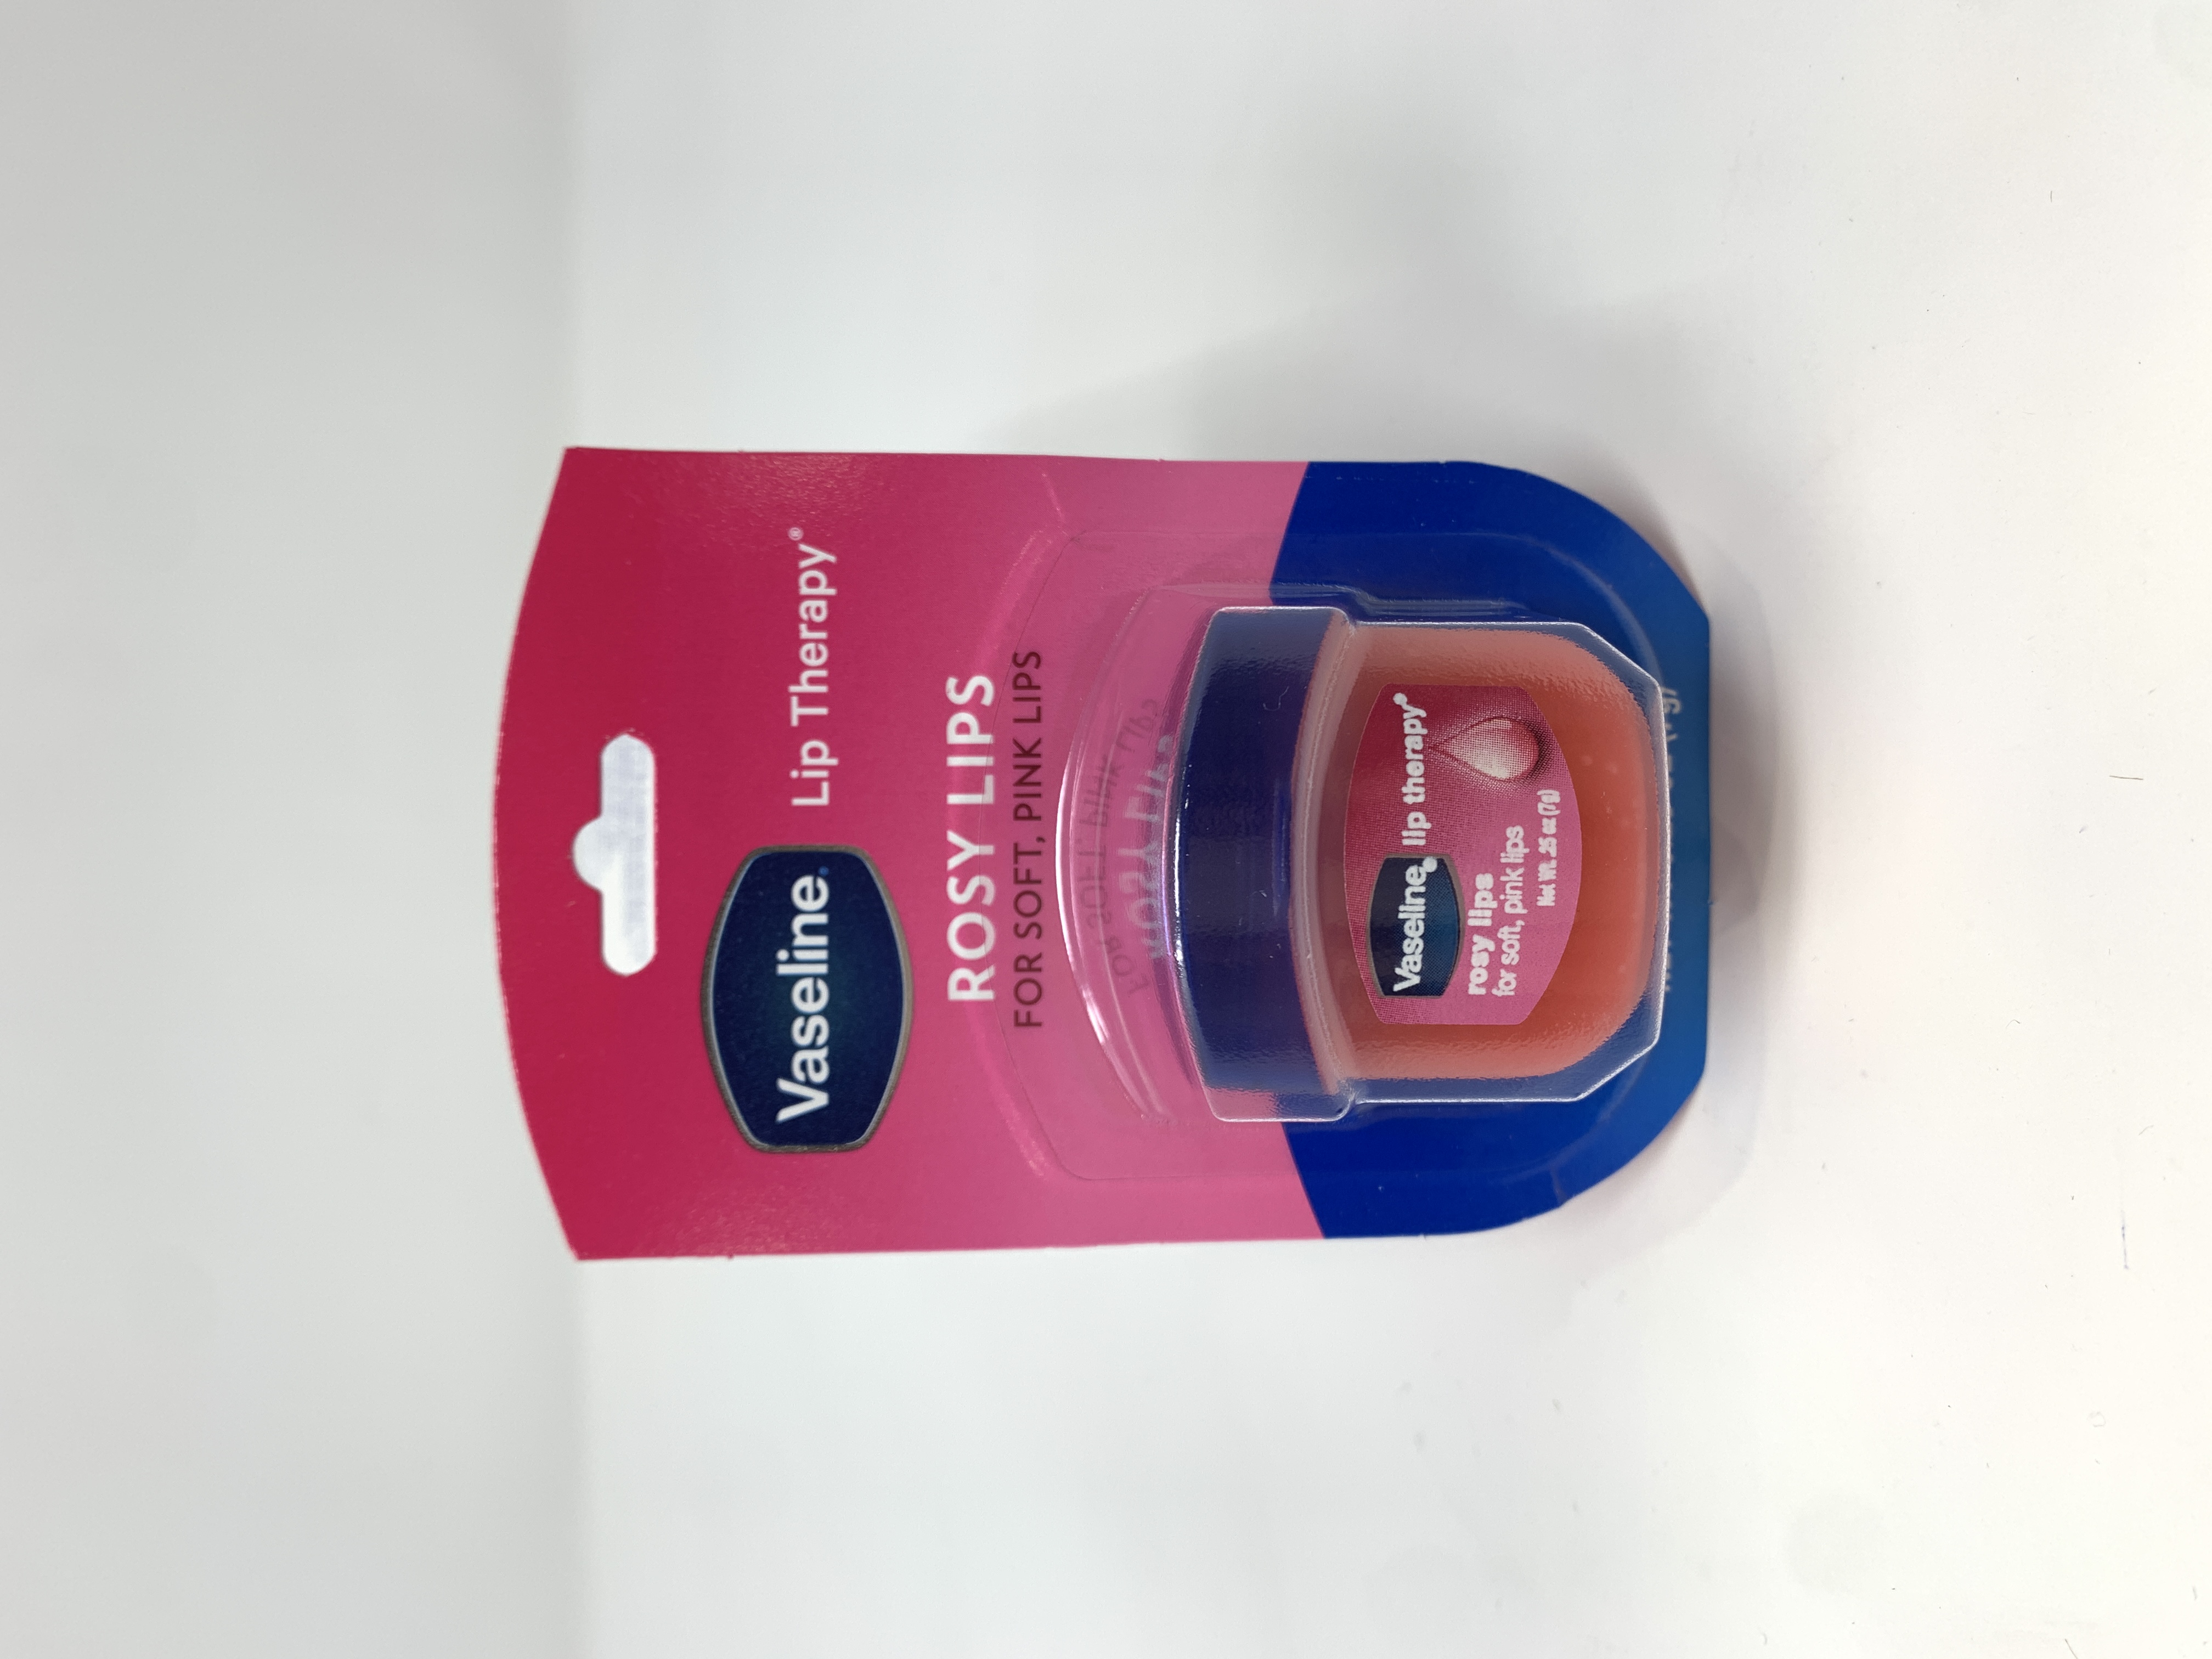 4 Pack Vaseline Rosy Lips Lip Therapy for Soft, Pink Lips, 0.25oz Each - image 3 of 3